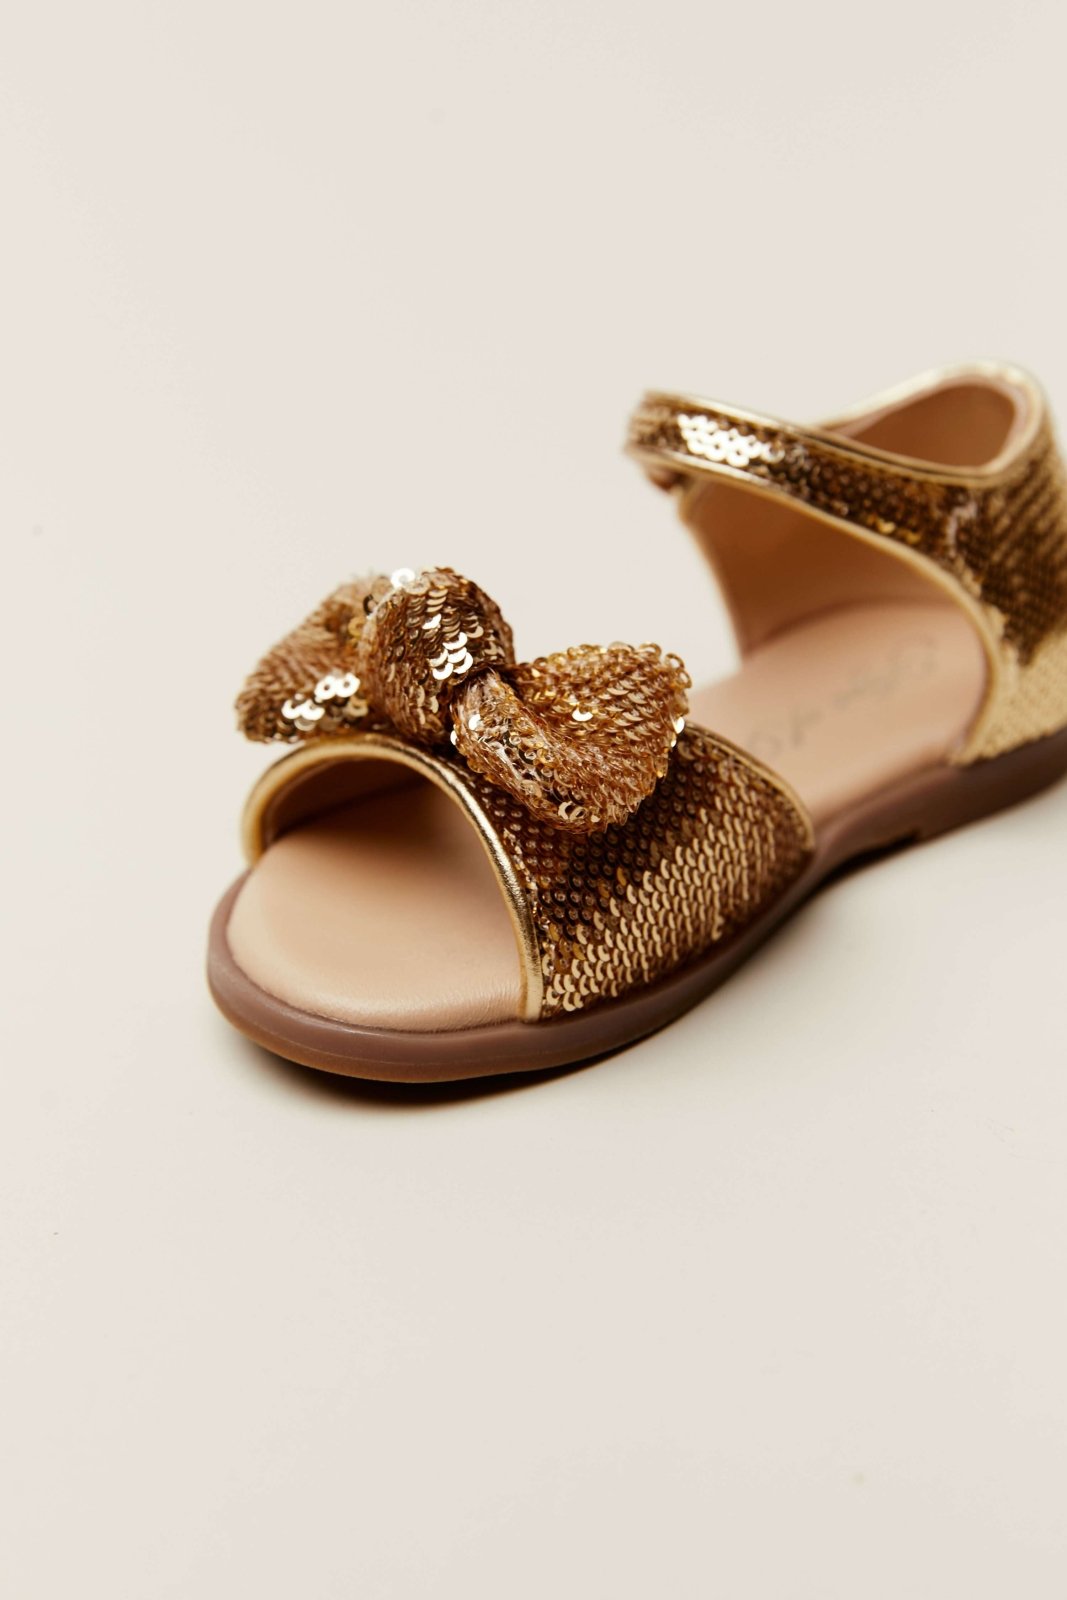 Margo Sequins Gold Sandals by Age of Innocence